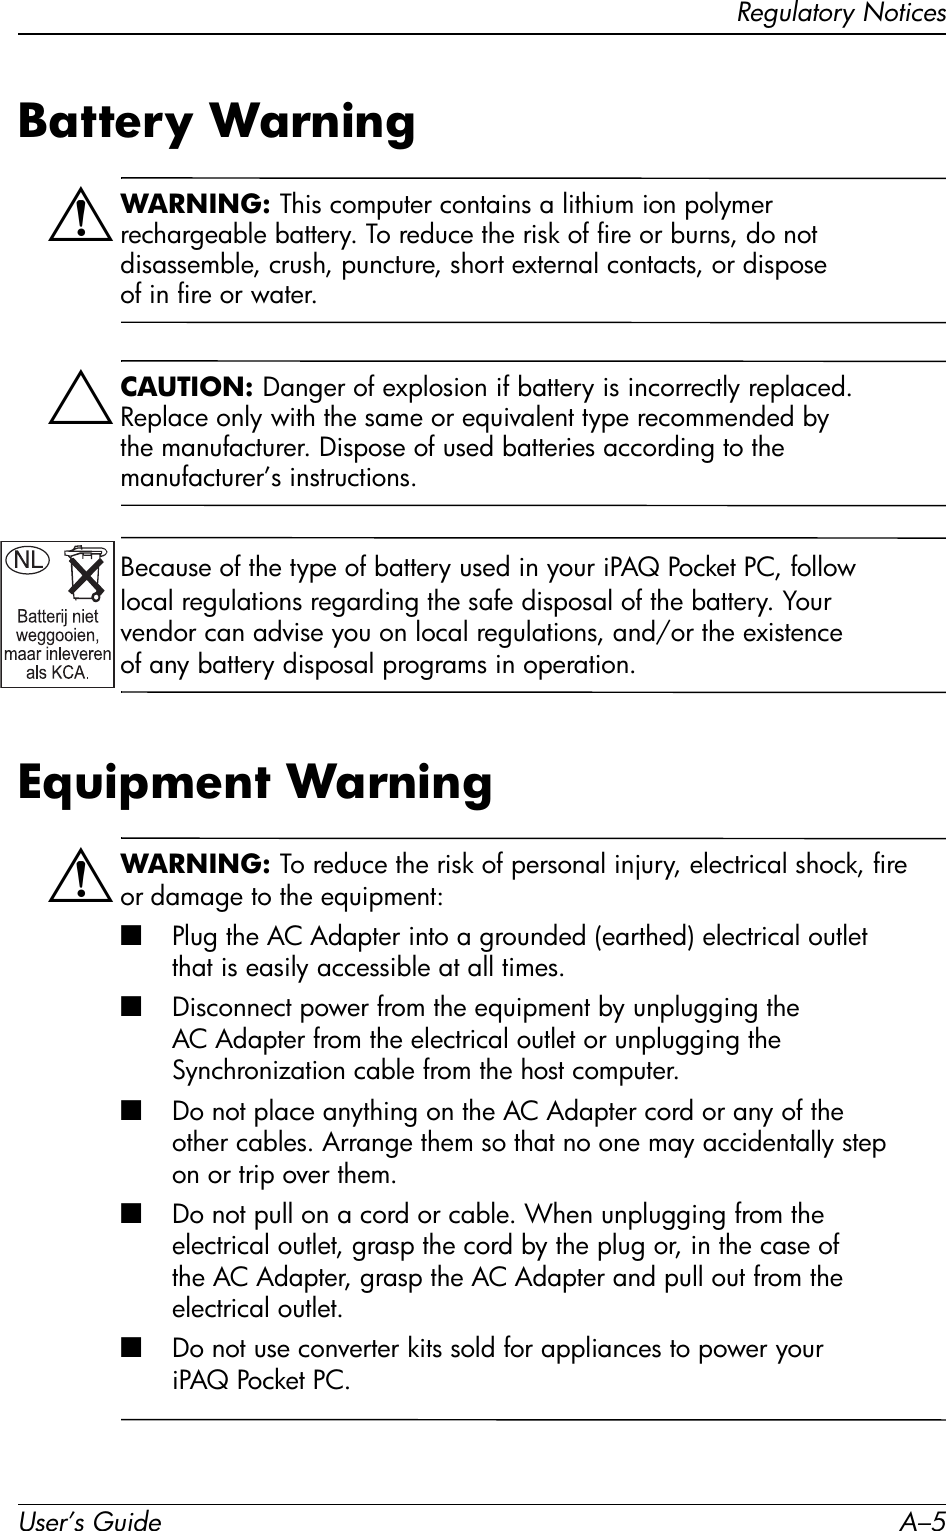 Regulatory NoticesUser’s Guide A–5Battery WarningÅWARNING: This computer contains a lithium ion polymer rechargeable battery. To reduce the risk of fire or burns, do not disassemble, crush, puncture, short external contacts, or dispose of in fire or water. ÄCAUTION: Danger of explosion if battery is incorrectly replaced. Replace only with the same or equivalent type recommended by the manufacturer. Dispose of used batteries according to the manufacturer’s instructions.Because of the type of battery used in your iPAQ Pocket PC, follow local regulations regarding the safe disposal of the battery. Your vendor can advise you on local regulations, and/or the existence of any battery disposal programs in operation.Equipment WarningÅWARNING: To reduce the risk of personal injury, electrical shock, fire or damage to the equipment:■Plug the AC Adapter into a grounded (earthed) electrical outlet that is easily accessible at all times.■Disconnect power from the equipment by unplugging the AC Adapter from the electrical outlet or unplugging the Synchronization cable from the host computer.■Do not place anything on the AC Adapter cord or any of the other cables. Arrange them so that no one may accidentally step on or trip over them.■Do not pull on a cord or cable. When unplugging from the electrical outlet, grasp the cord by the plug or, in the case of the AC Adapter, grasp the AC Adapter and pull out from the electrical outlet.■Do not use converter kits sold for appliances to power your iPAQ Pocket PC.